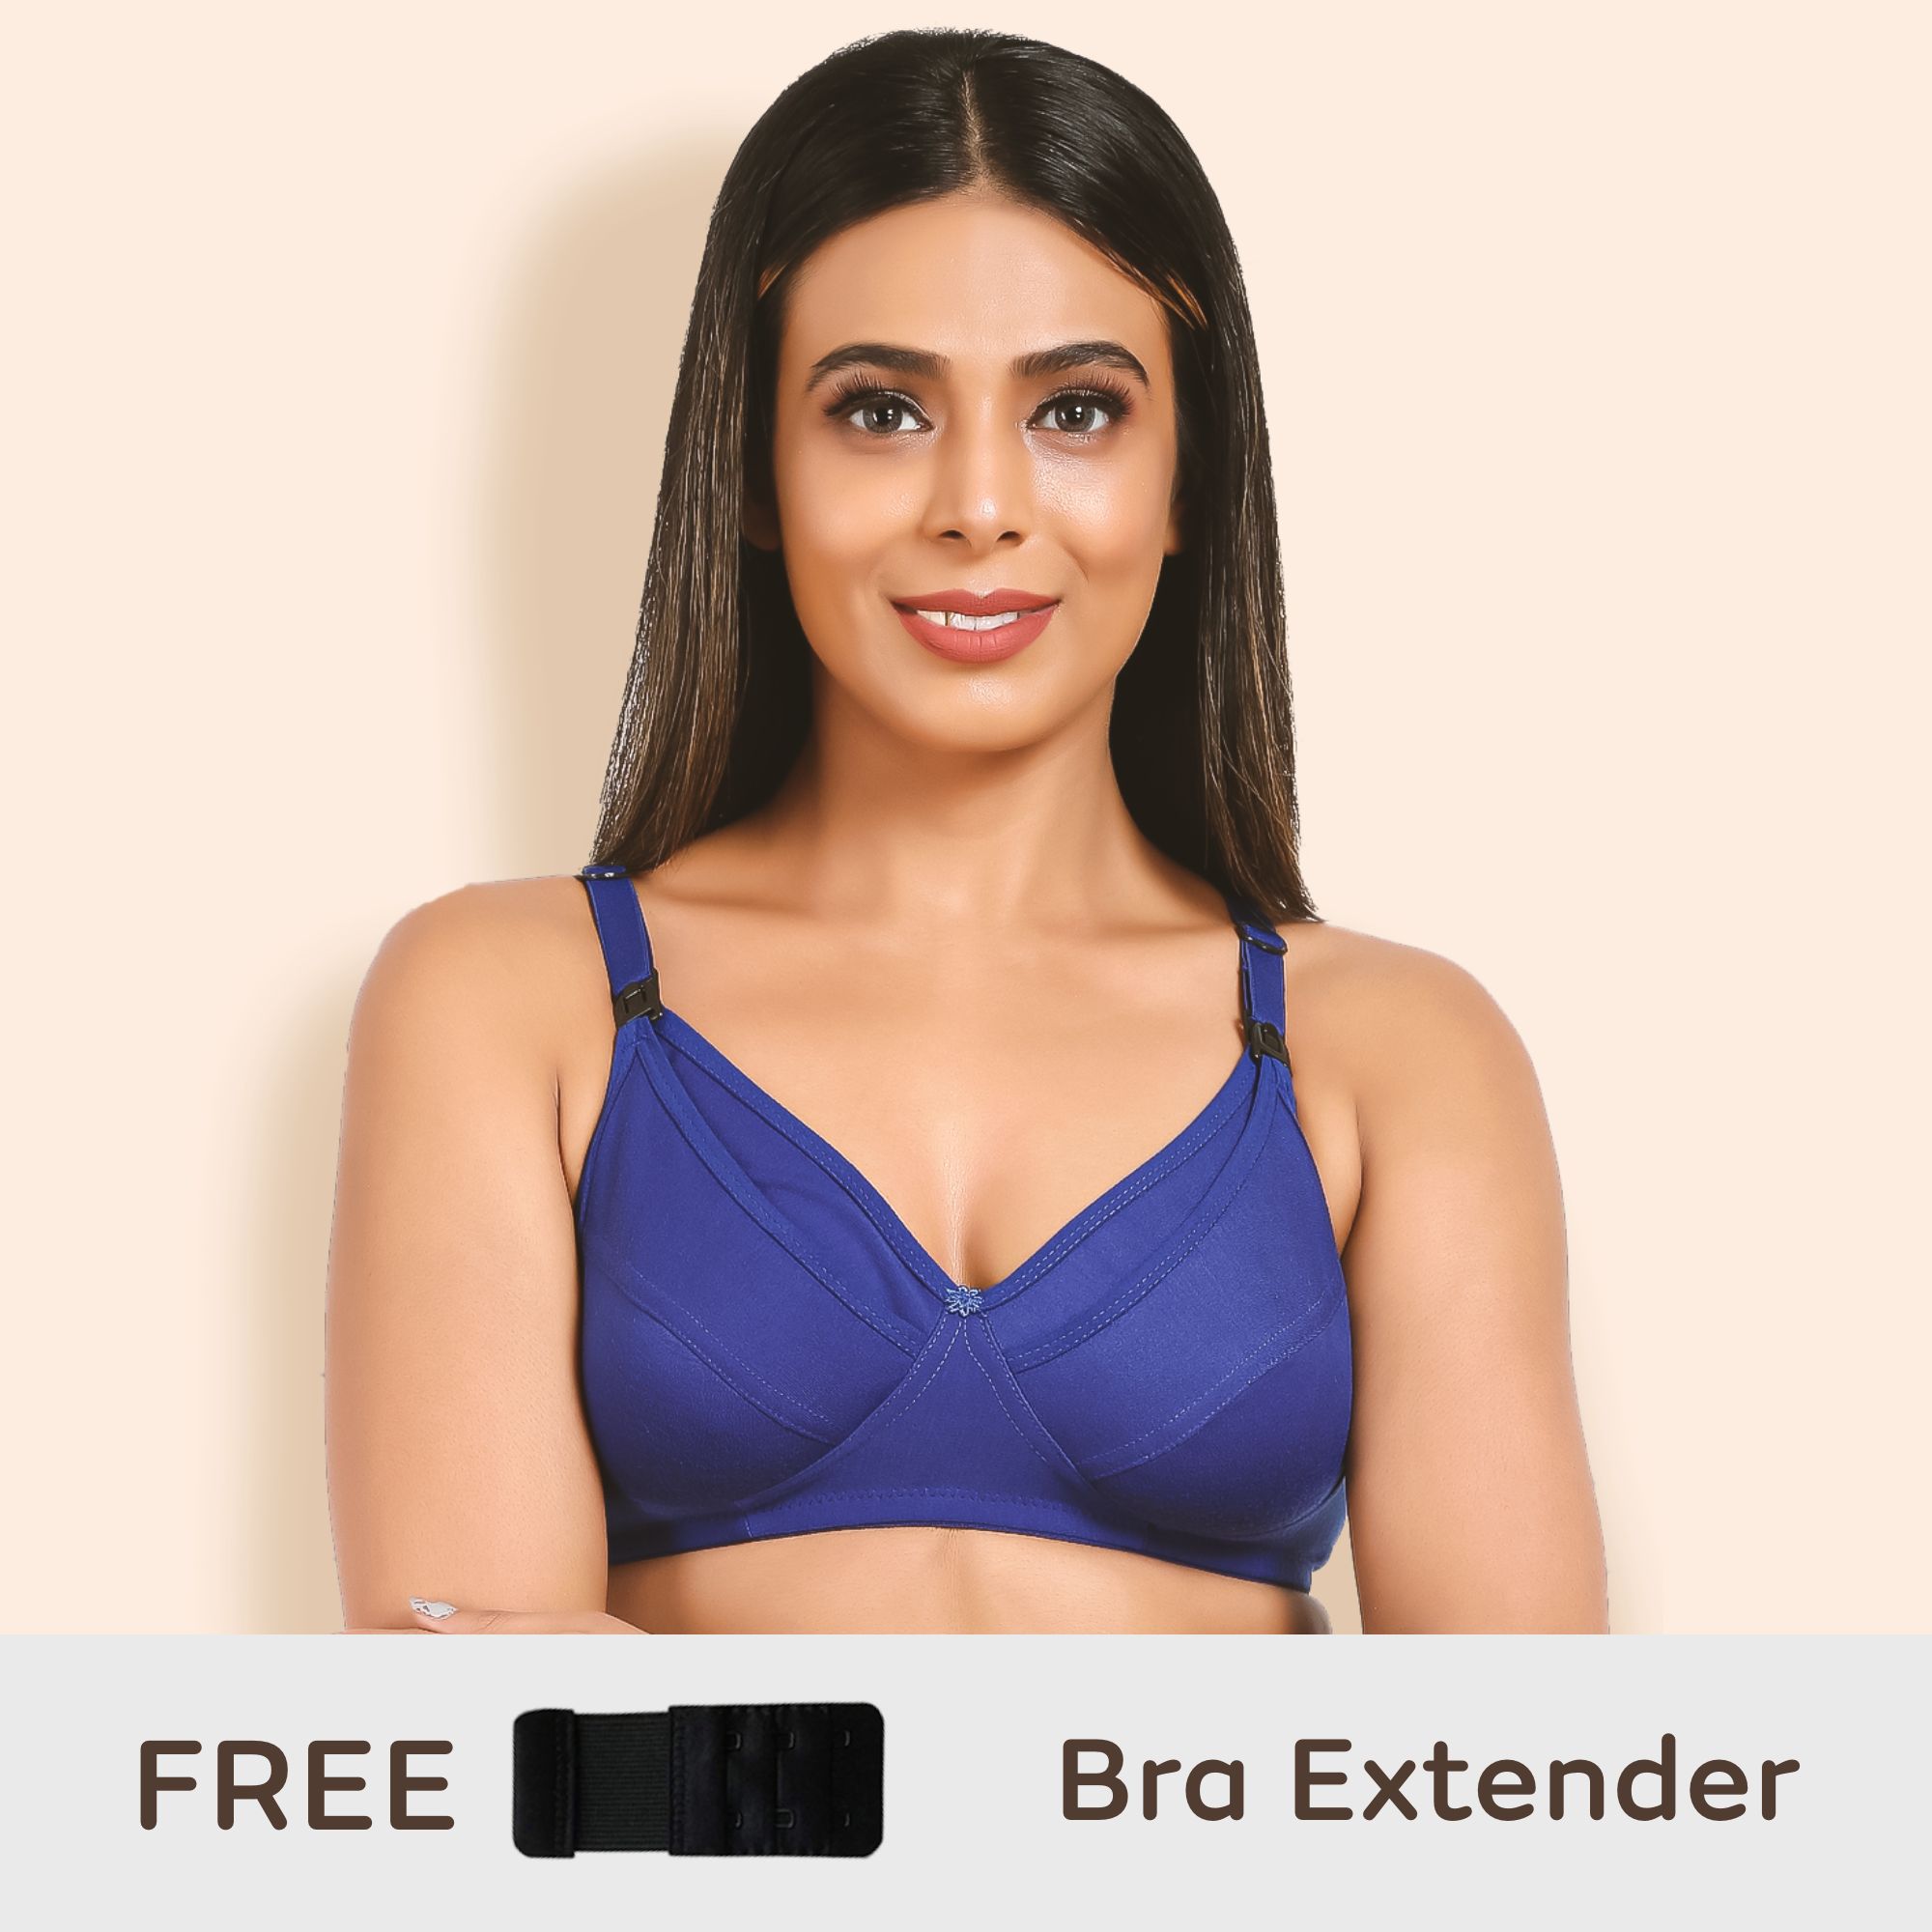 Maternity/Nursing Bras Non-Wired, Non-Padded with free Bra Extender – Persian Blue 30 B 